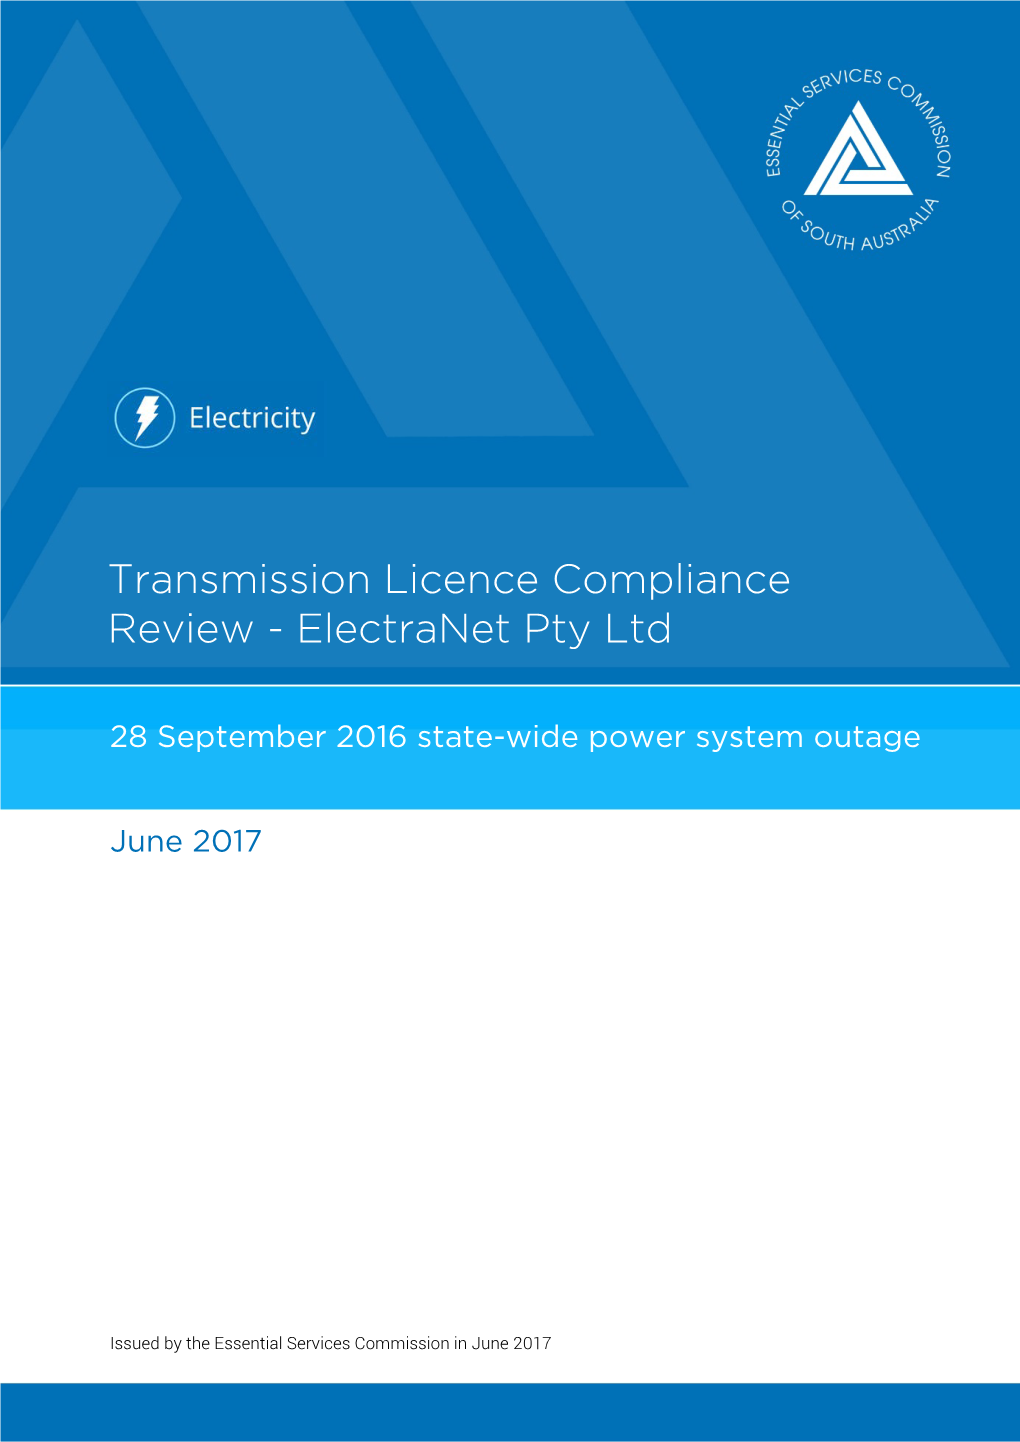 Transmission Licence Compliance Review - Electranet Pty Ltd